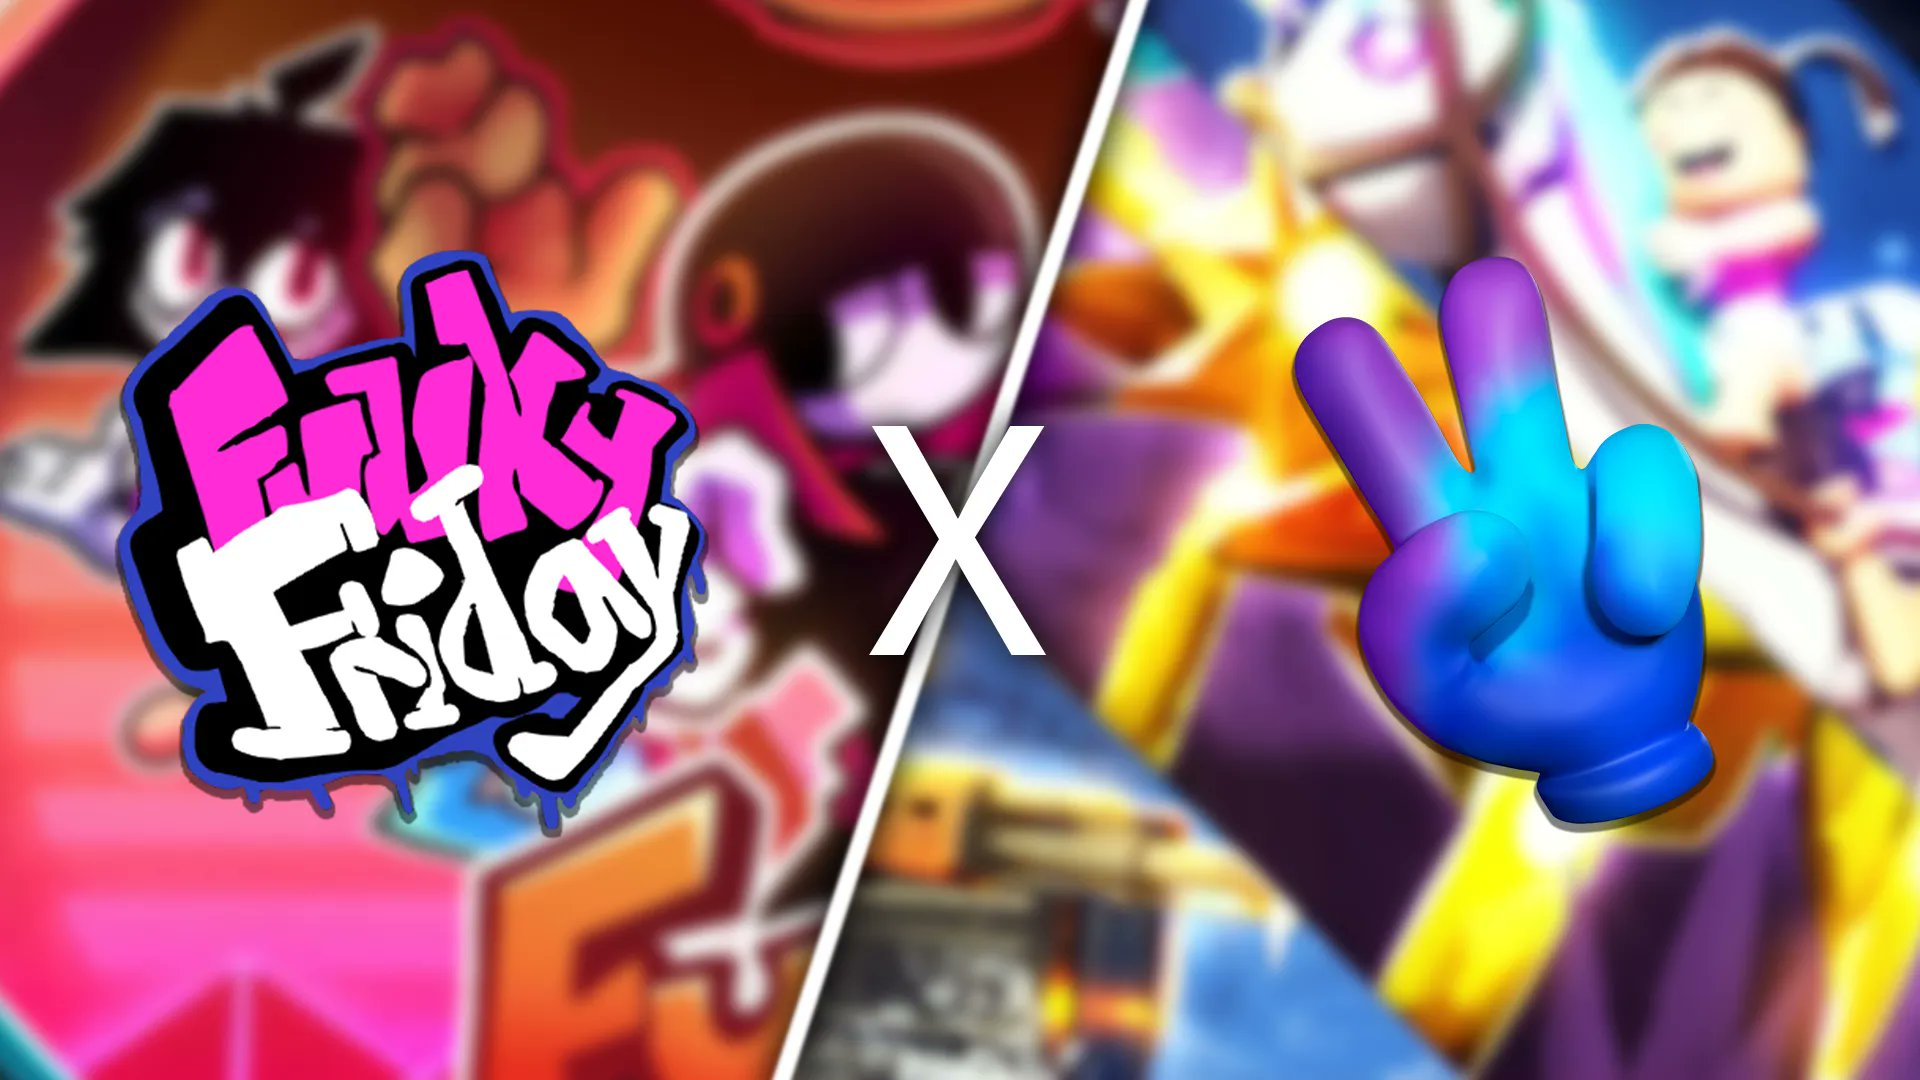 Roblox Funky Friday codes (December 2021)